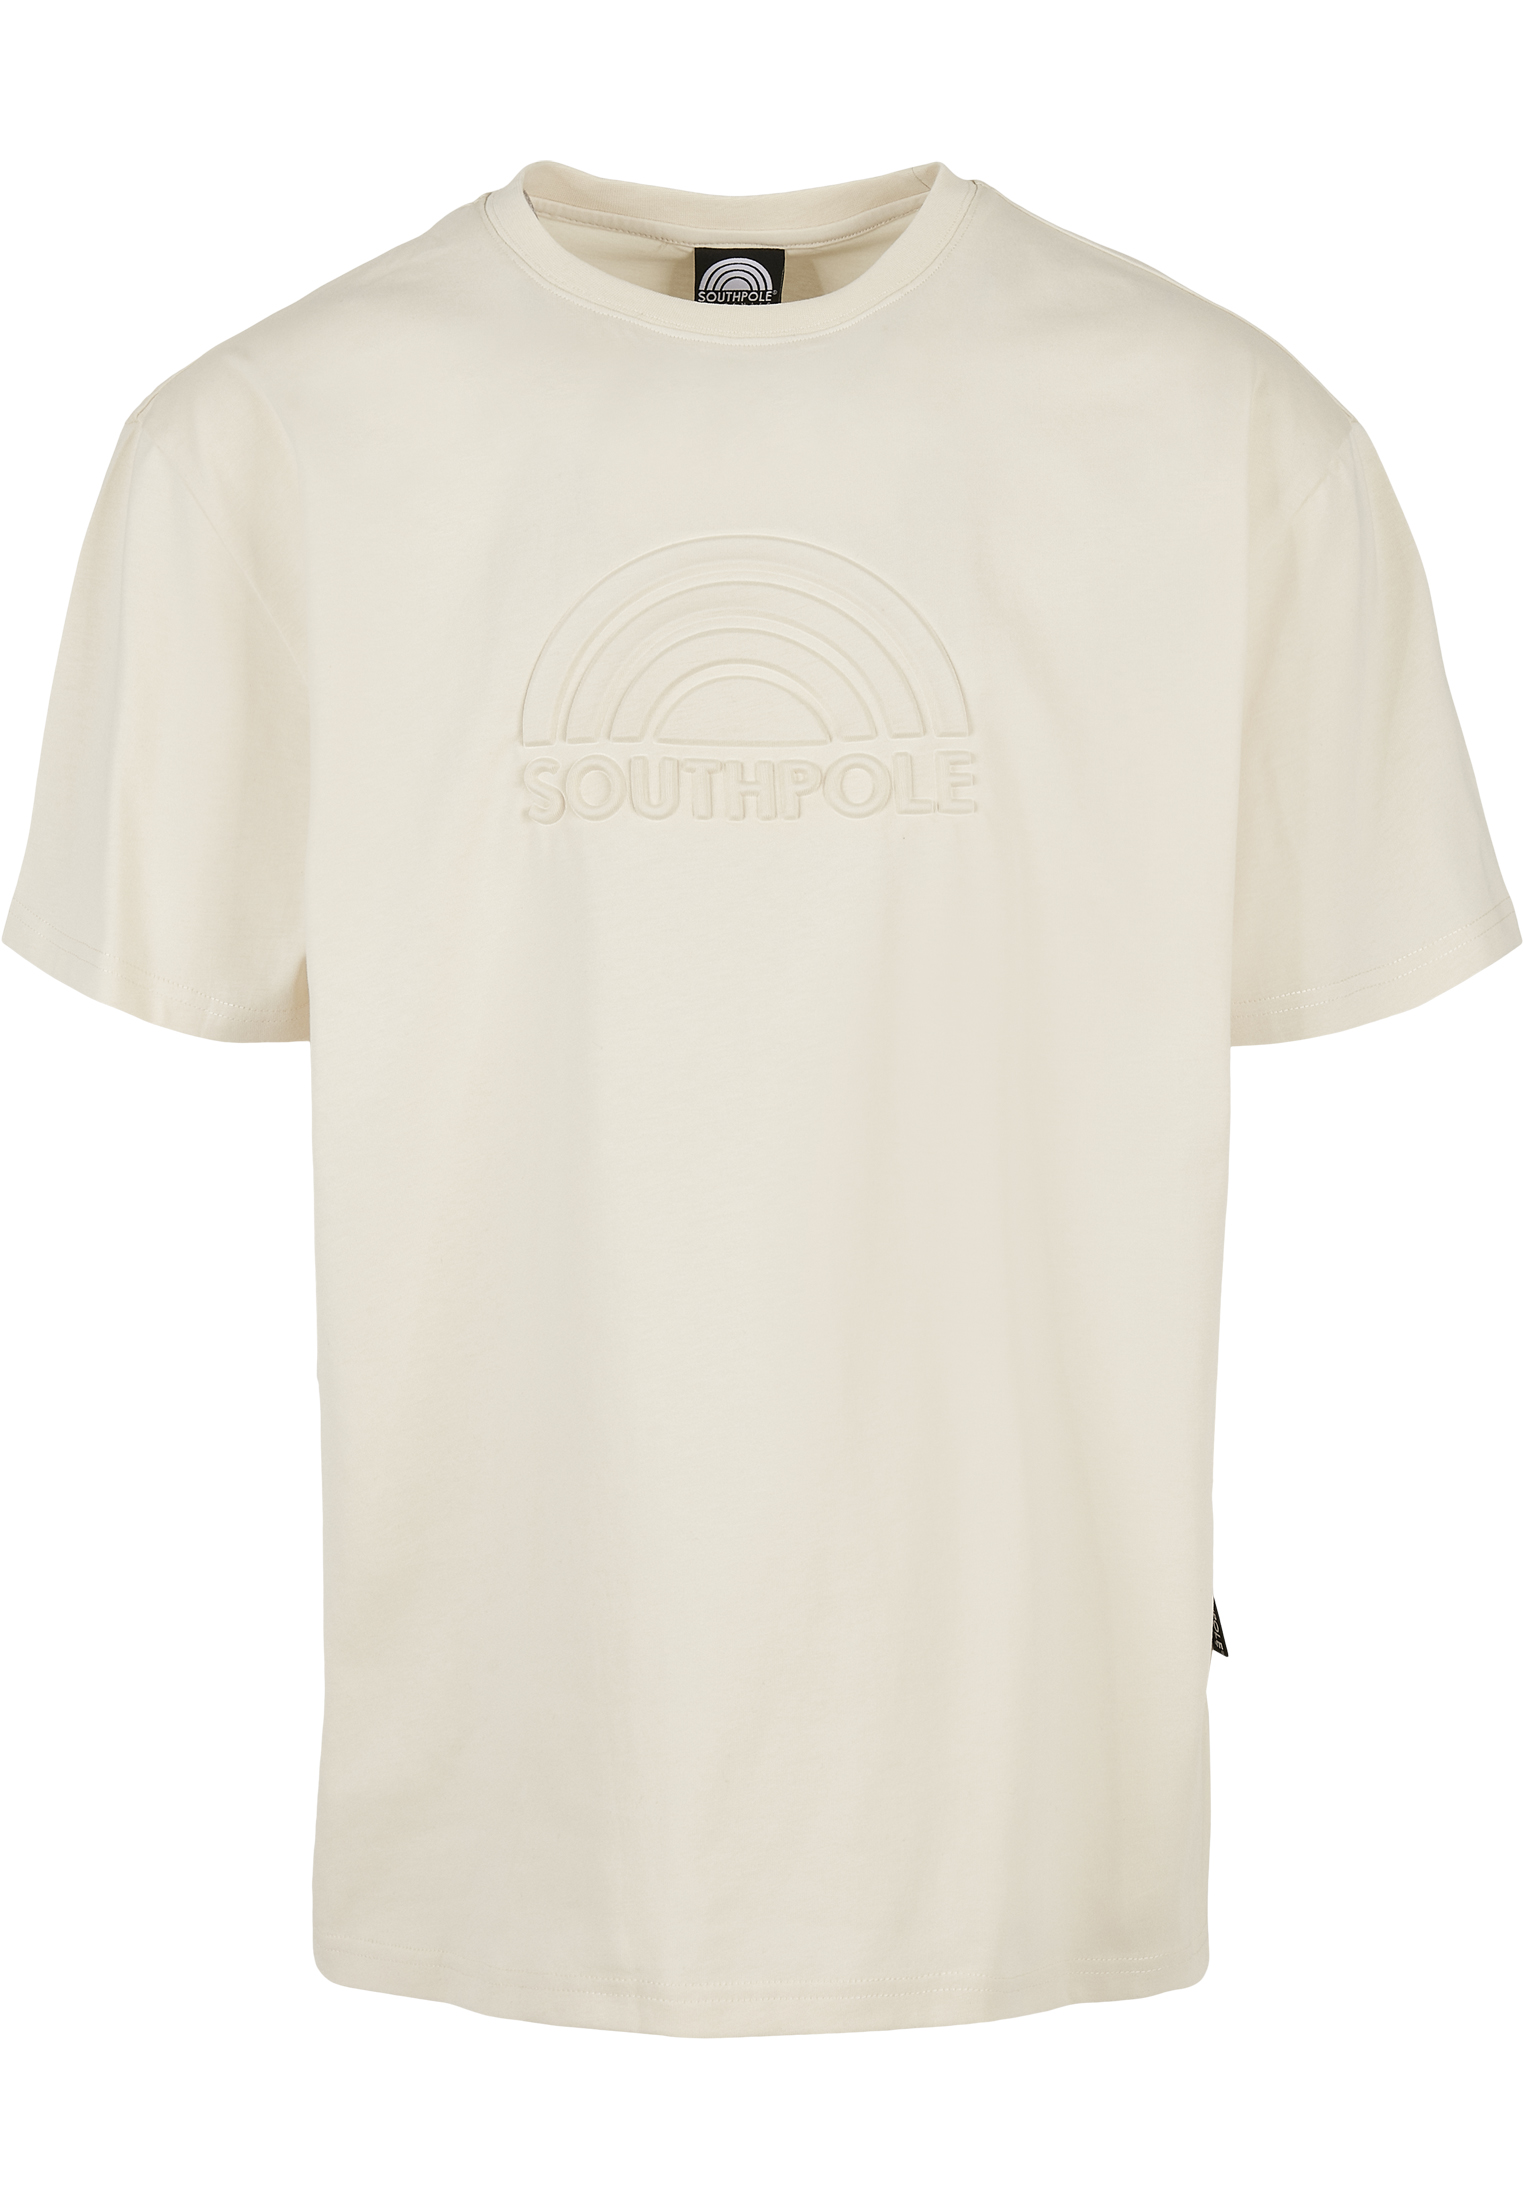 Nos Kollektion Southpole 3D Tee in Farbe sand